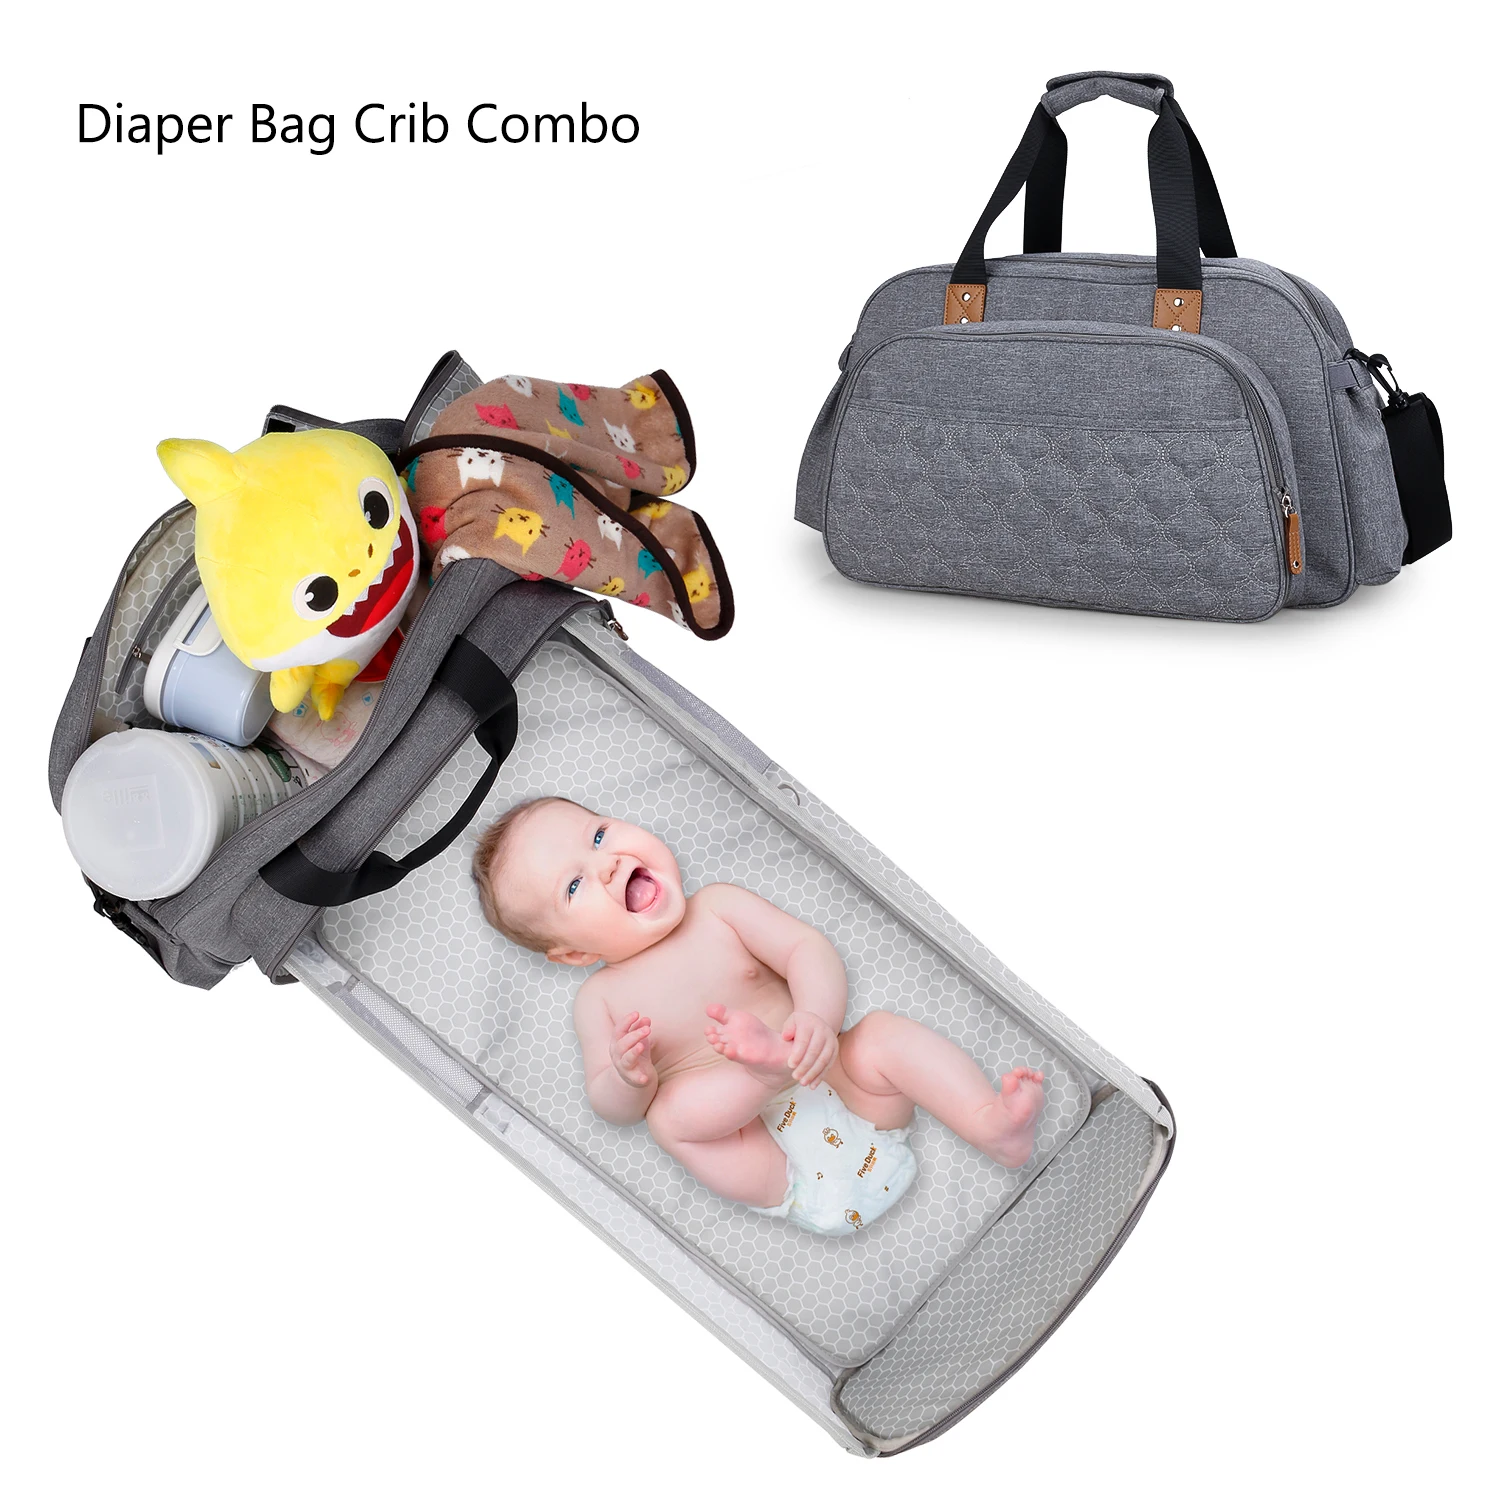 

Convertible Baby Diaper Bag Baby Bed Diaper Changing Table Pads For Outdoor Get Organized with Multi-Purpose Travel Baby Bag